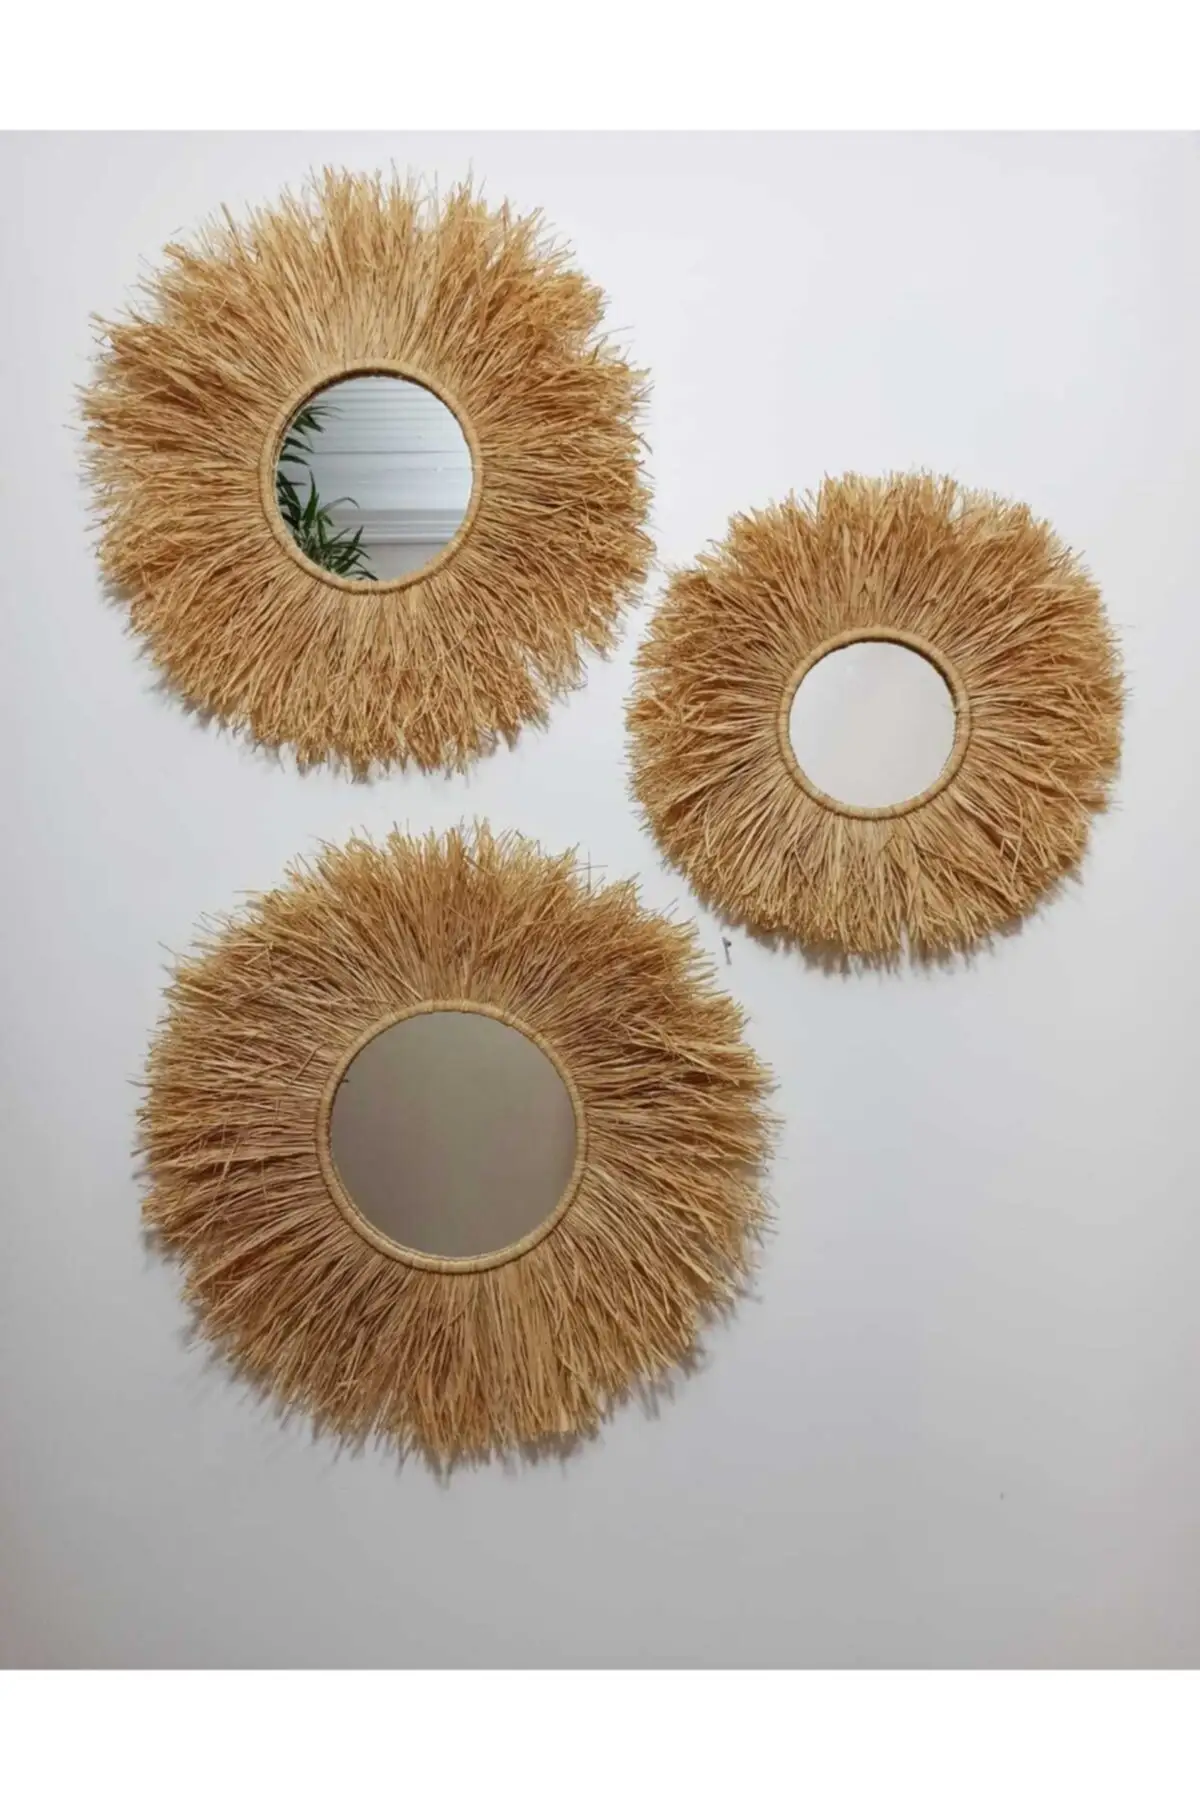 3 Pc Decorative Wall Mirrors Consol Round Furniture Full Body Mirror Large Length Decor Bathroom Made In From Turkey